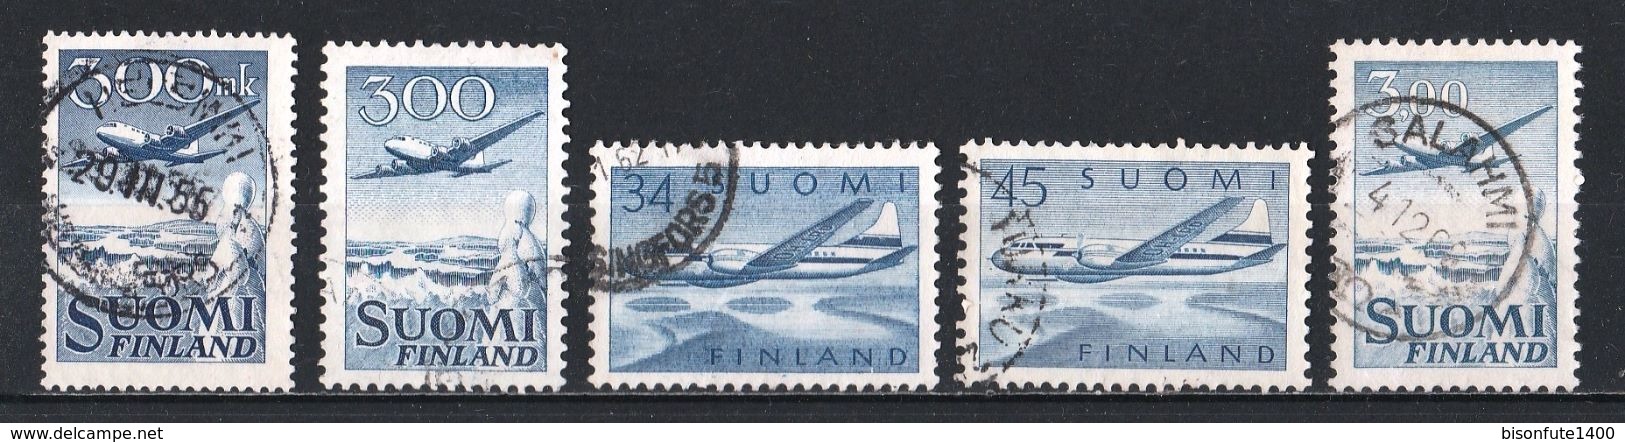 FINLANDE Poste Aérienne : Timbres Yvert & Tellier N° 3 - 4 - 5 - 6 - 9 - 10 Et 11. - Used Stamps